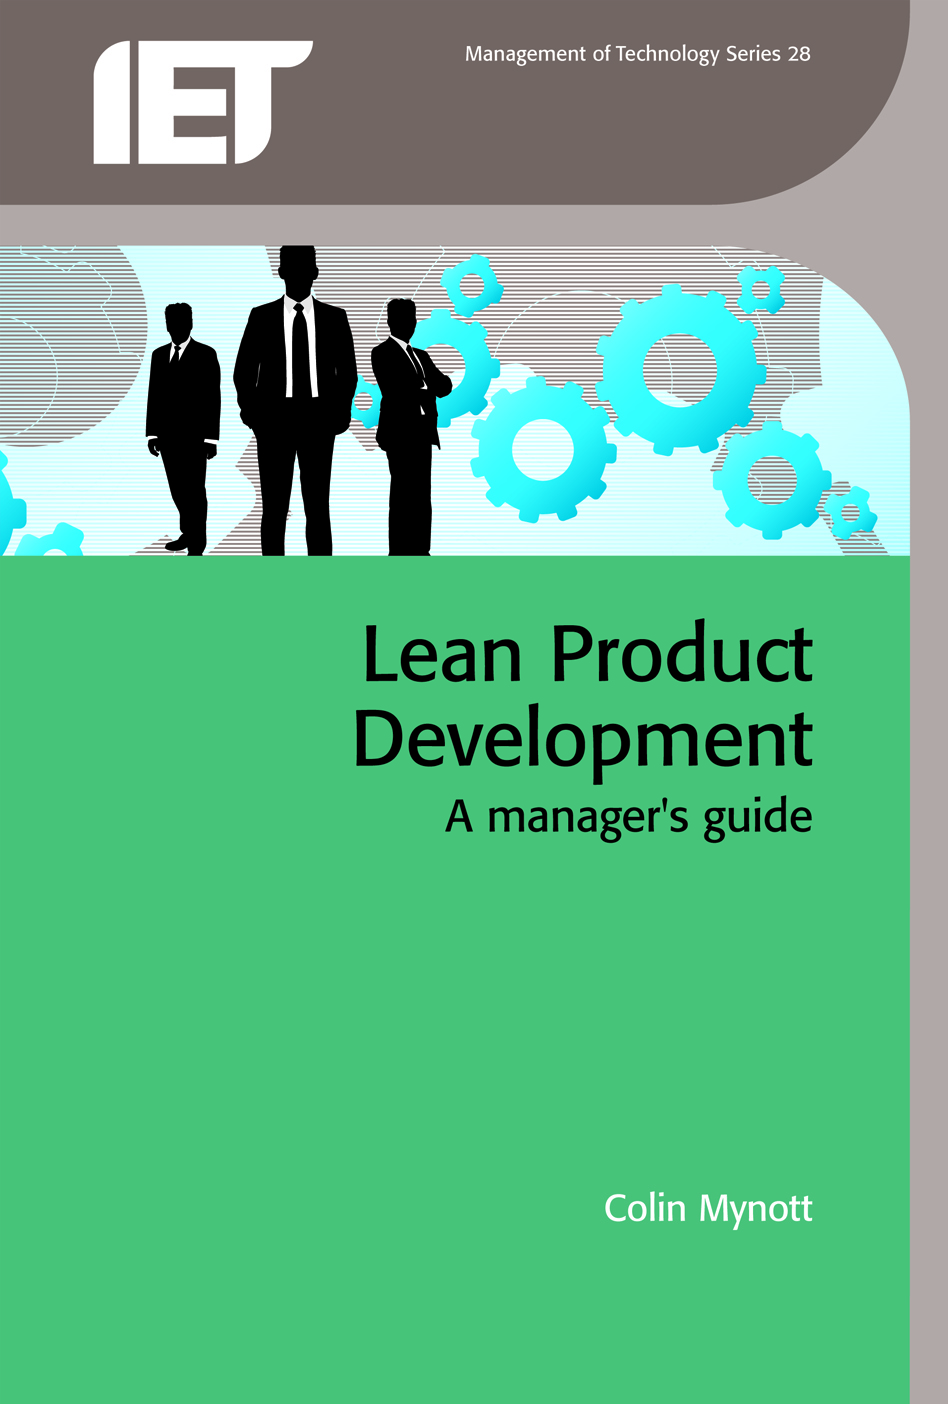 Lean Product Development, A manager's guide